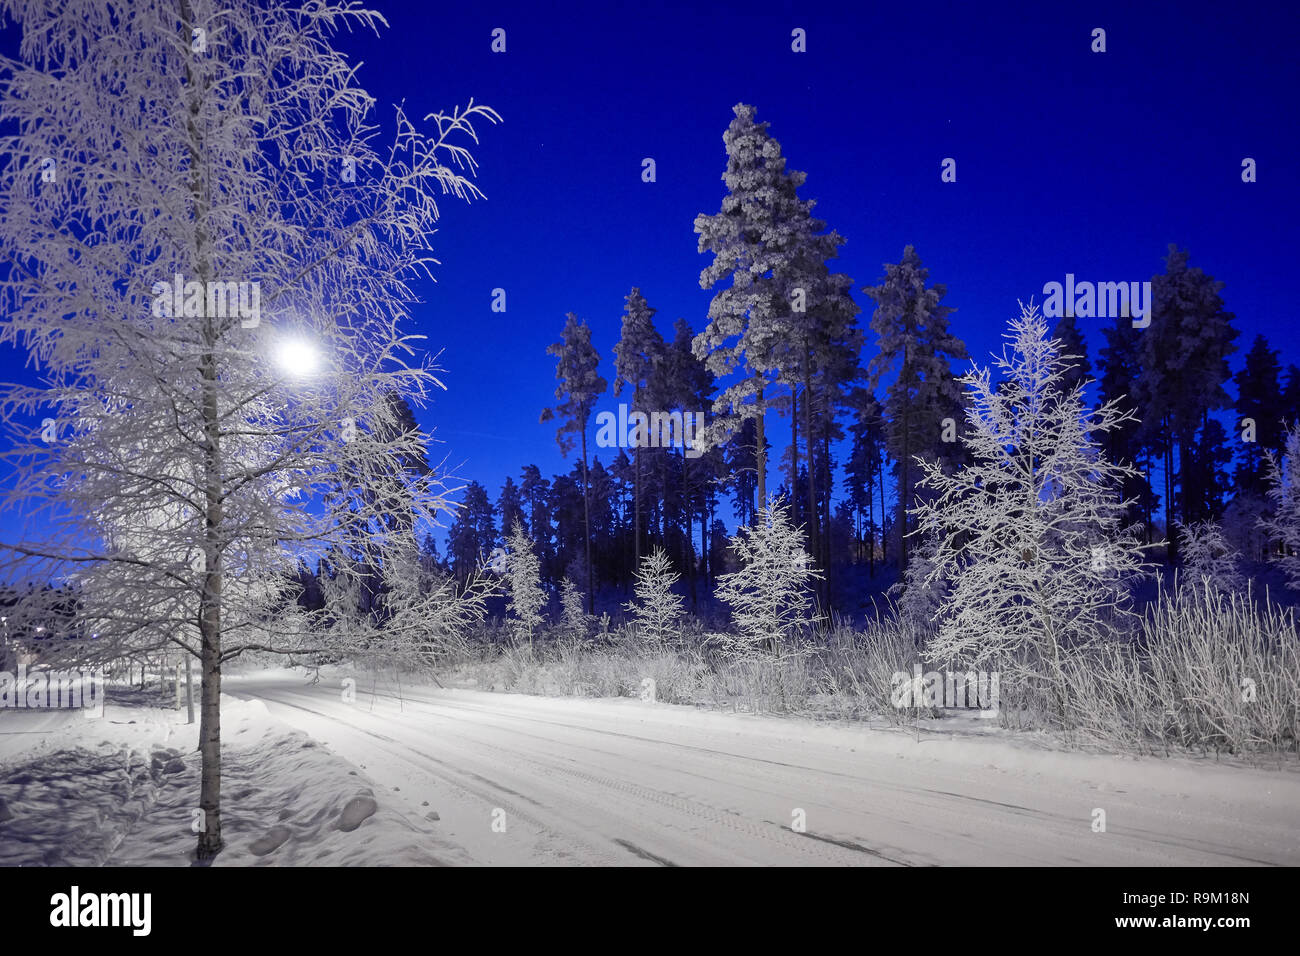 A road through peaceful winter night scene under beautiful blue sky. Snow cowered trees in very cold weather in Finland. Stock Photo